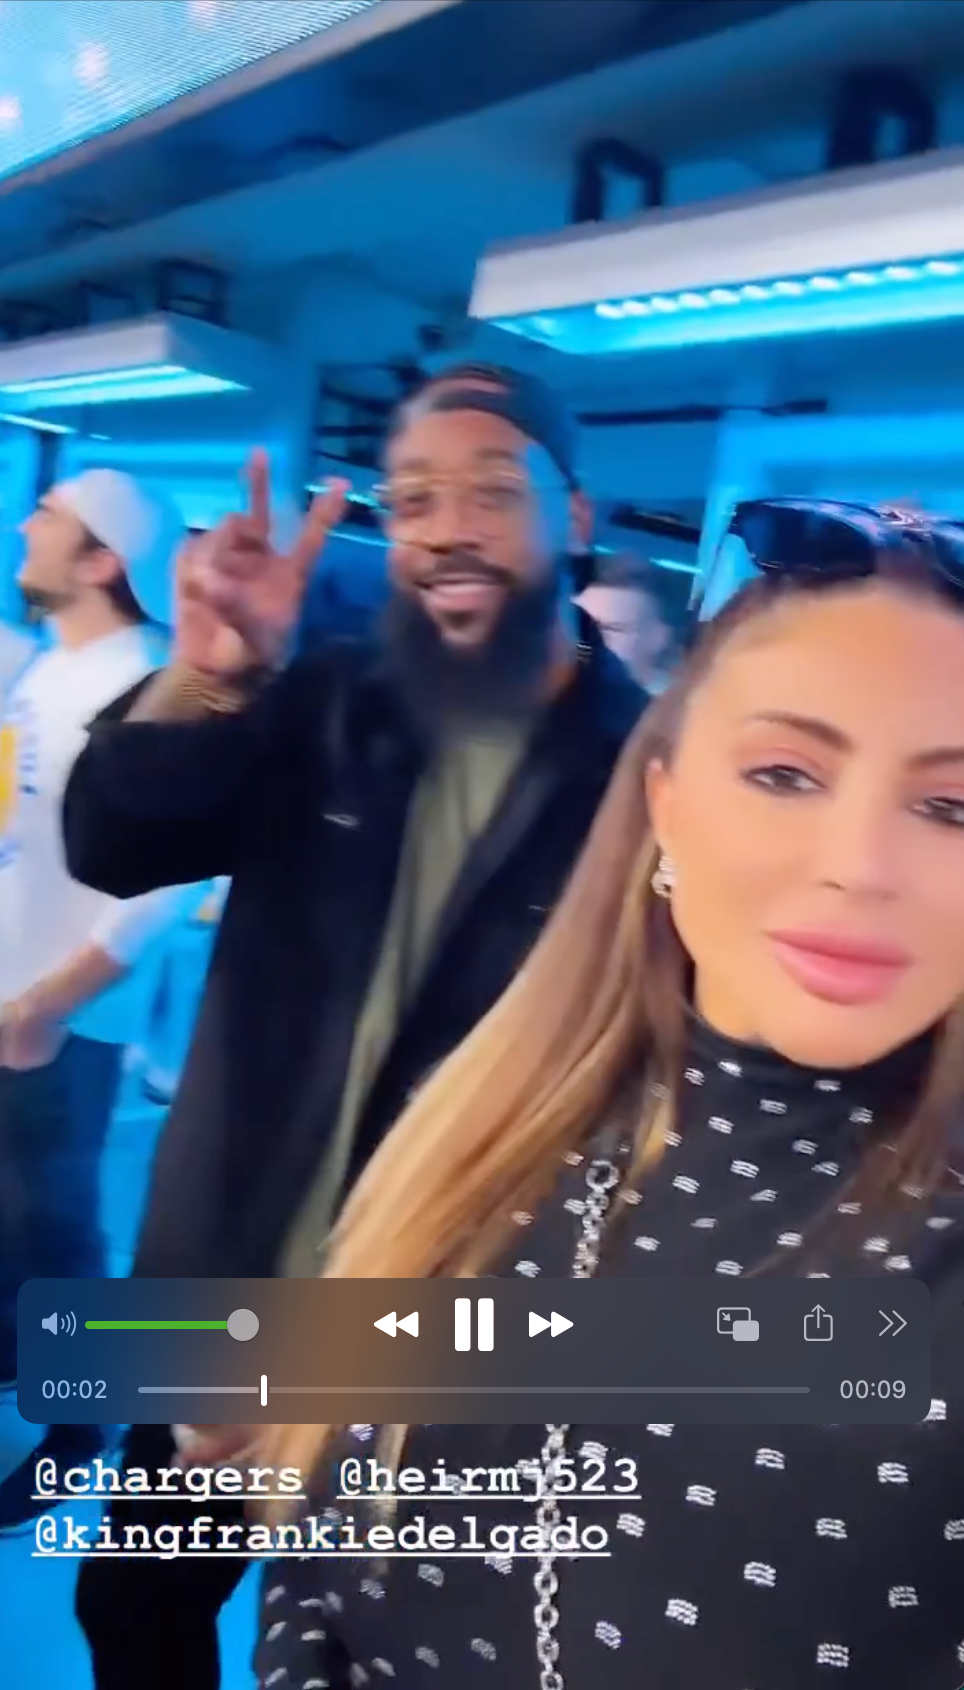 Larsa Pippen Spends Quality Time With Marcus Jordan